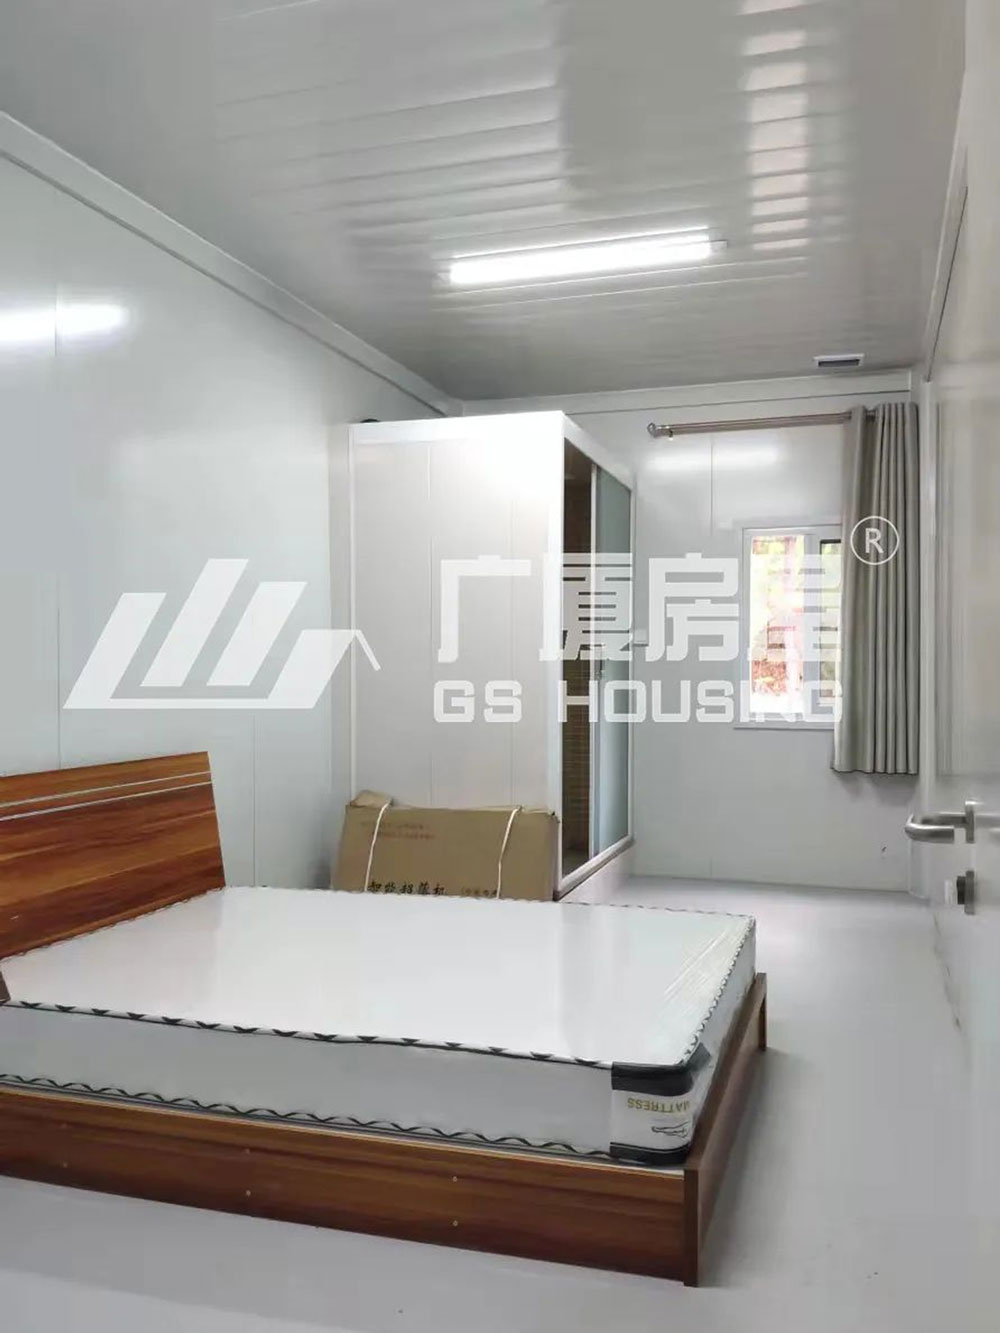 Modernong Prefabricated Flat Packed Assembly Prefab Container House para sa OpisinaModular VillaLiving Home Hotel Accommodation Hospital School Workshop (9)